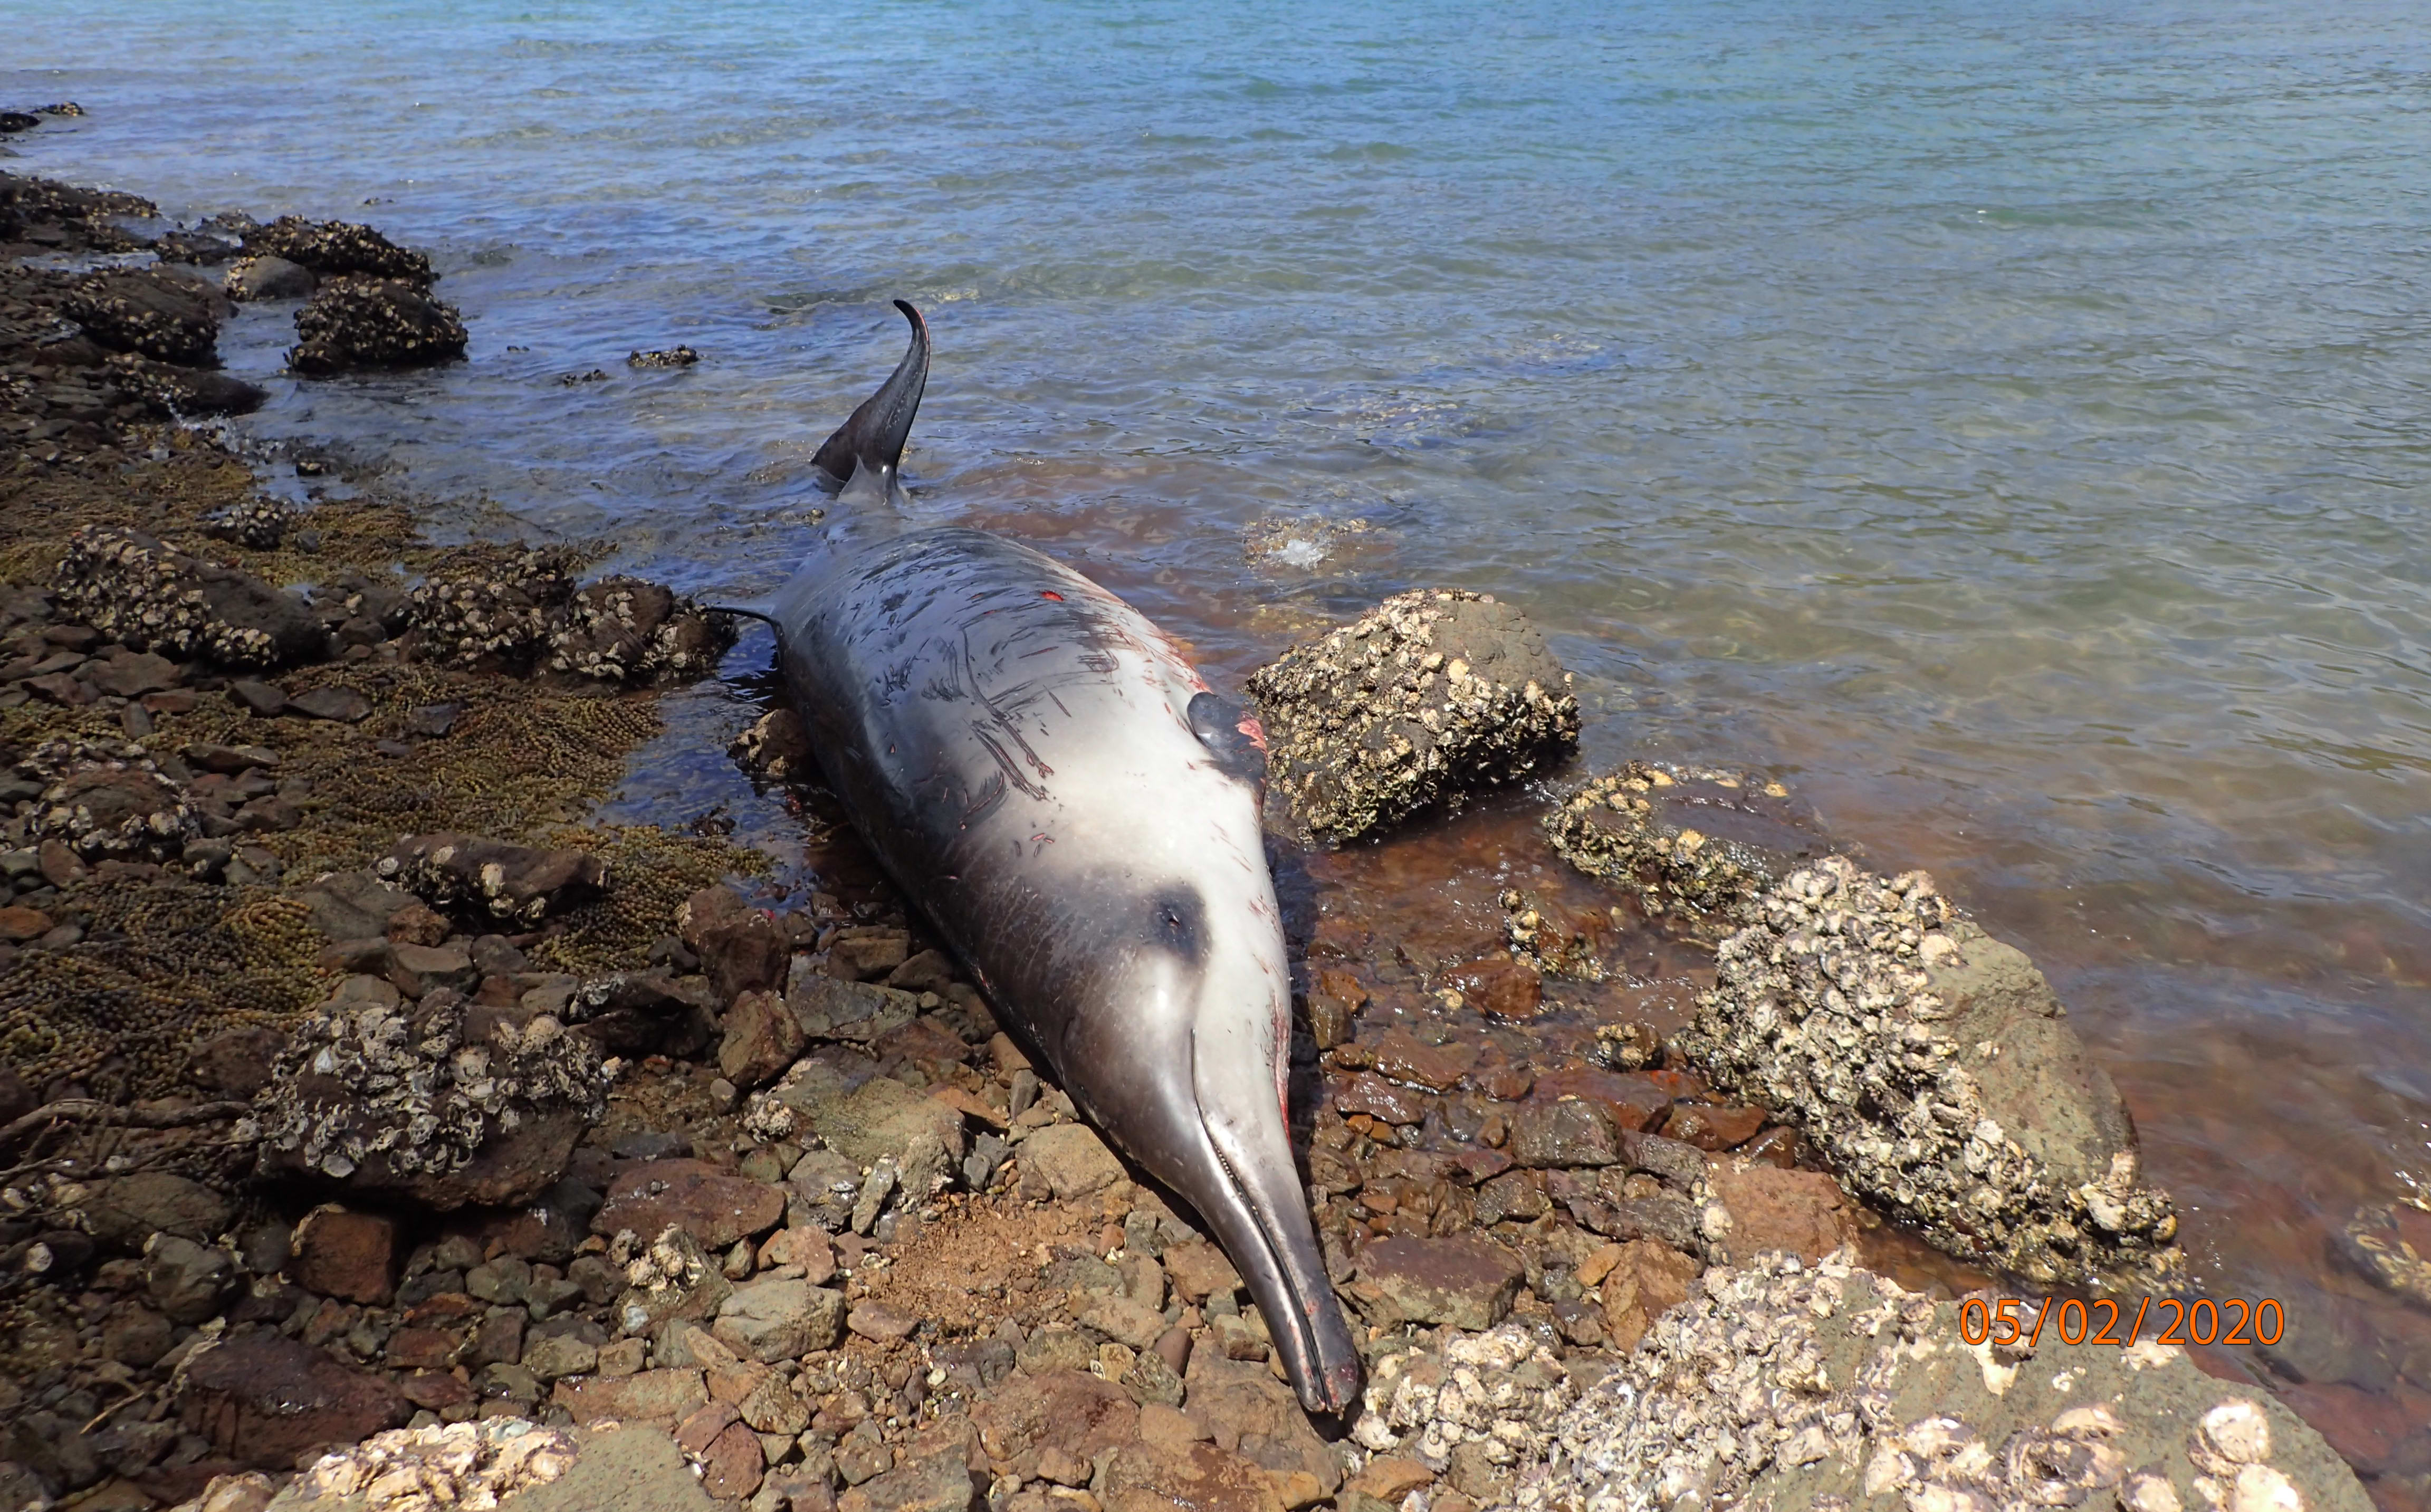 One of the Gray's beaked whales that beached.